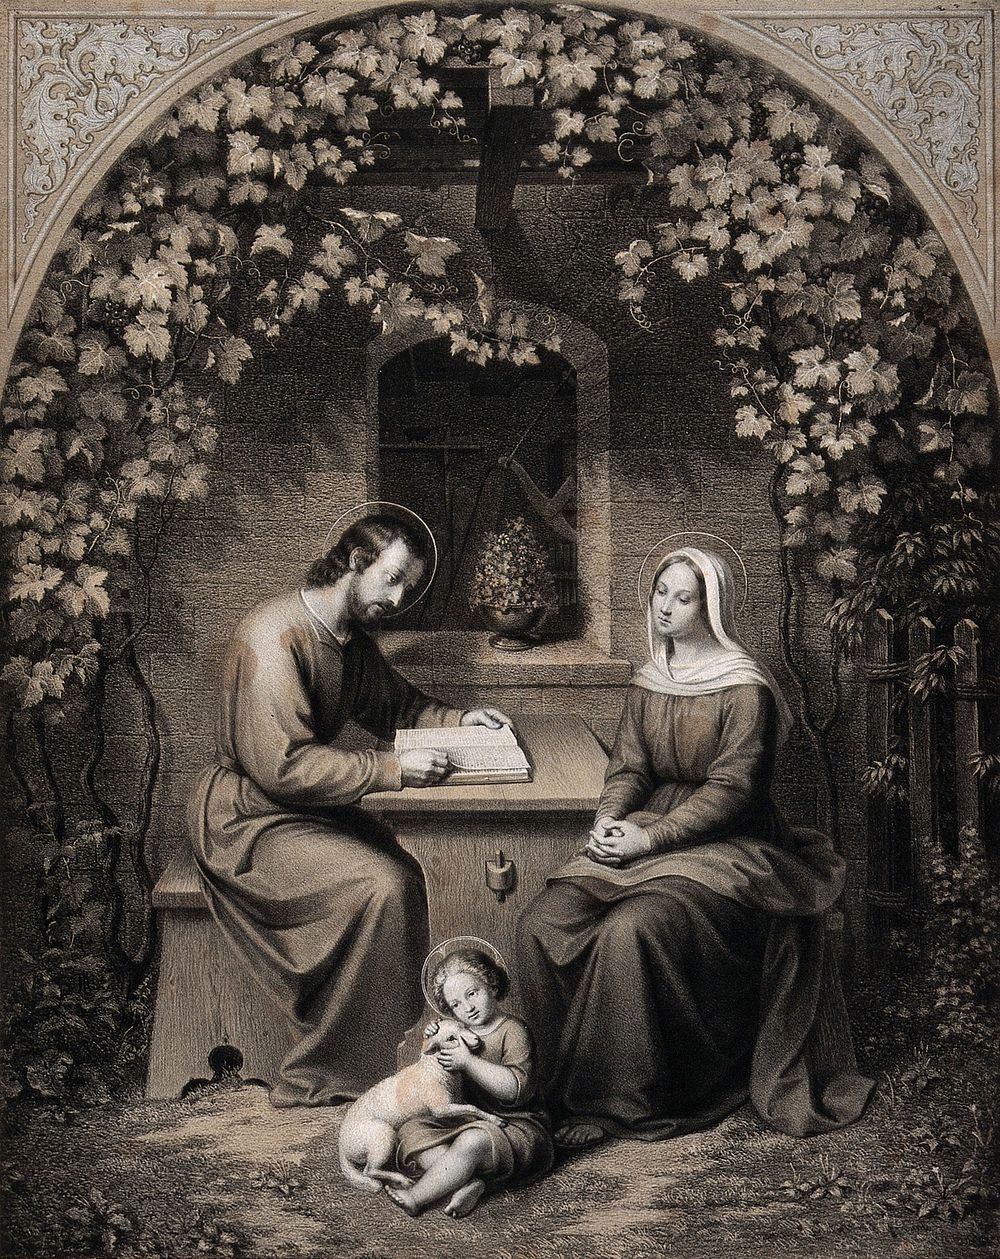 Saint Mary (the Blessed Virgin) and Saint Joseph with the Christ Child. Lithograph by J. Schlotthauer.